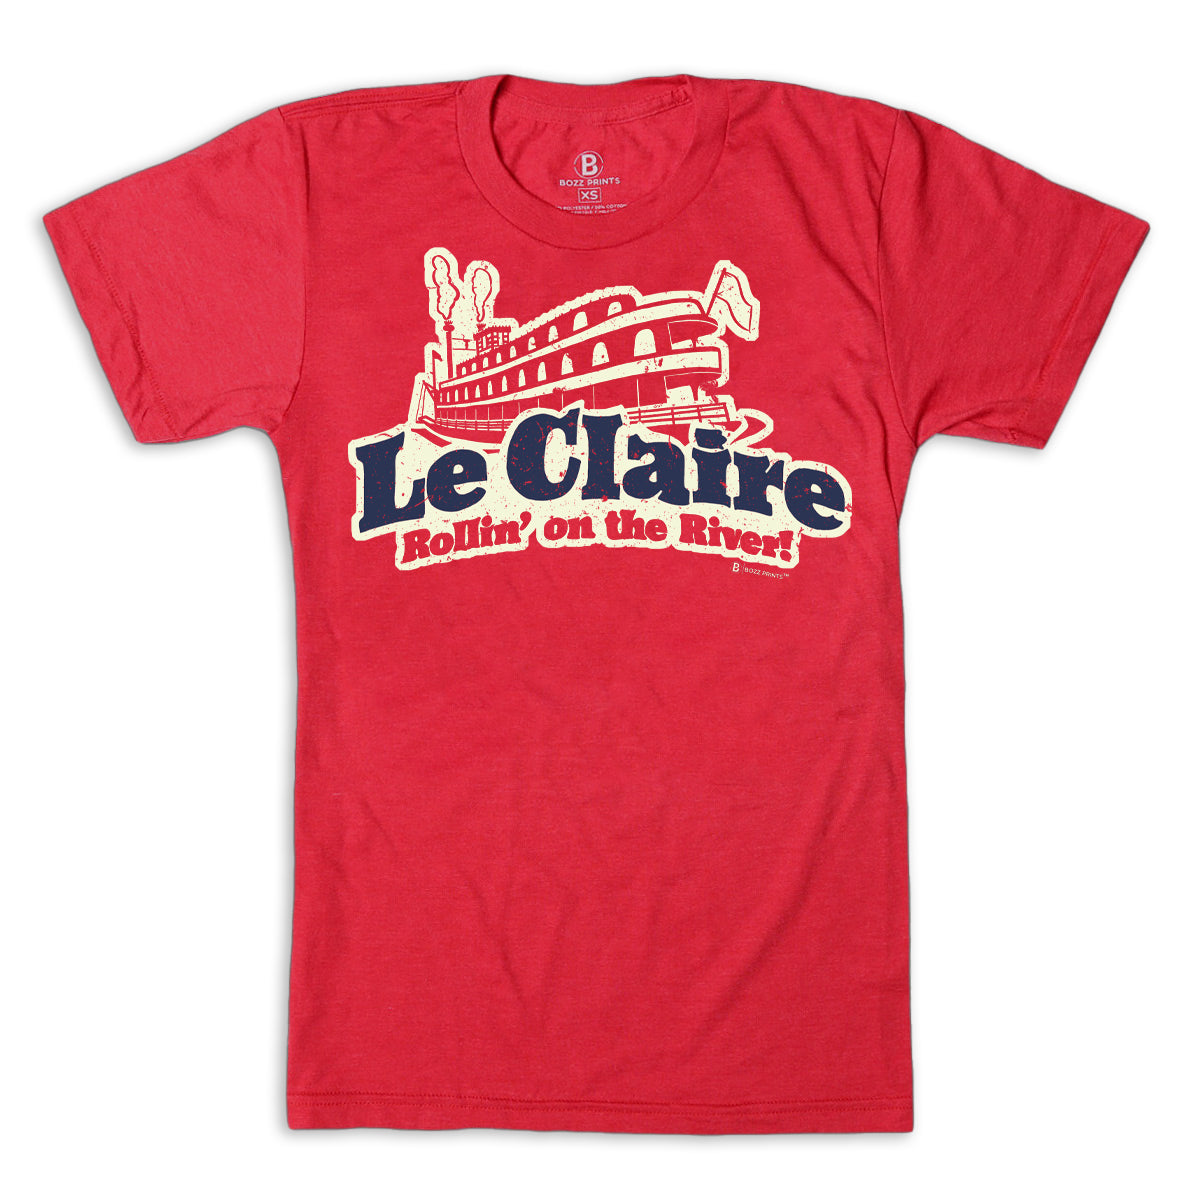 LeClaire Rollin' on the River T-Shirt